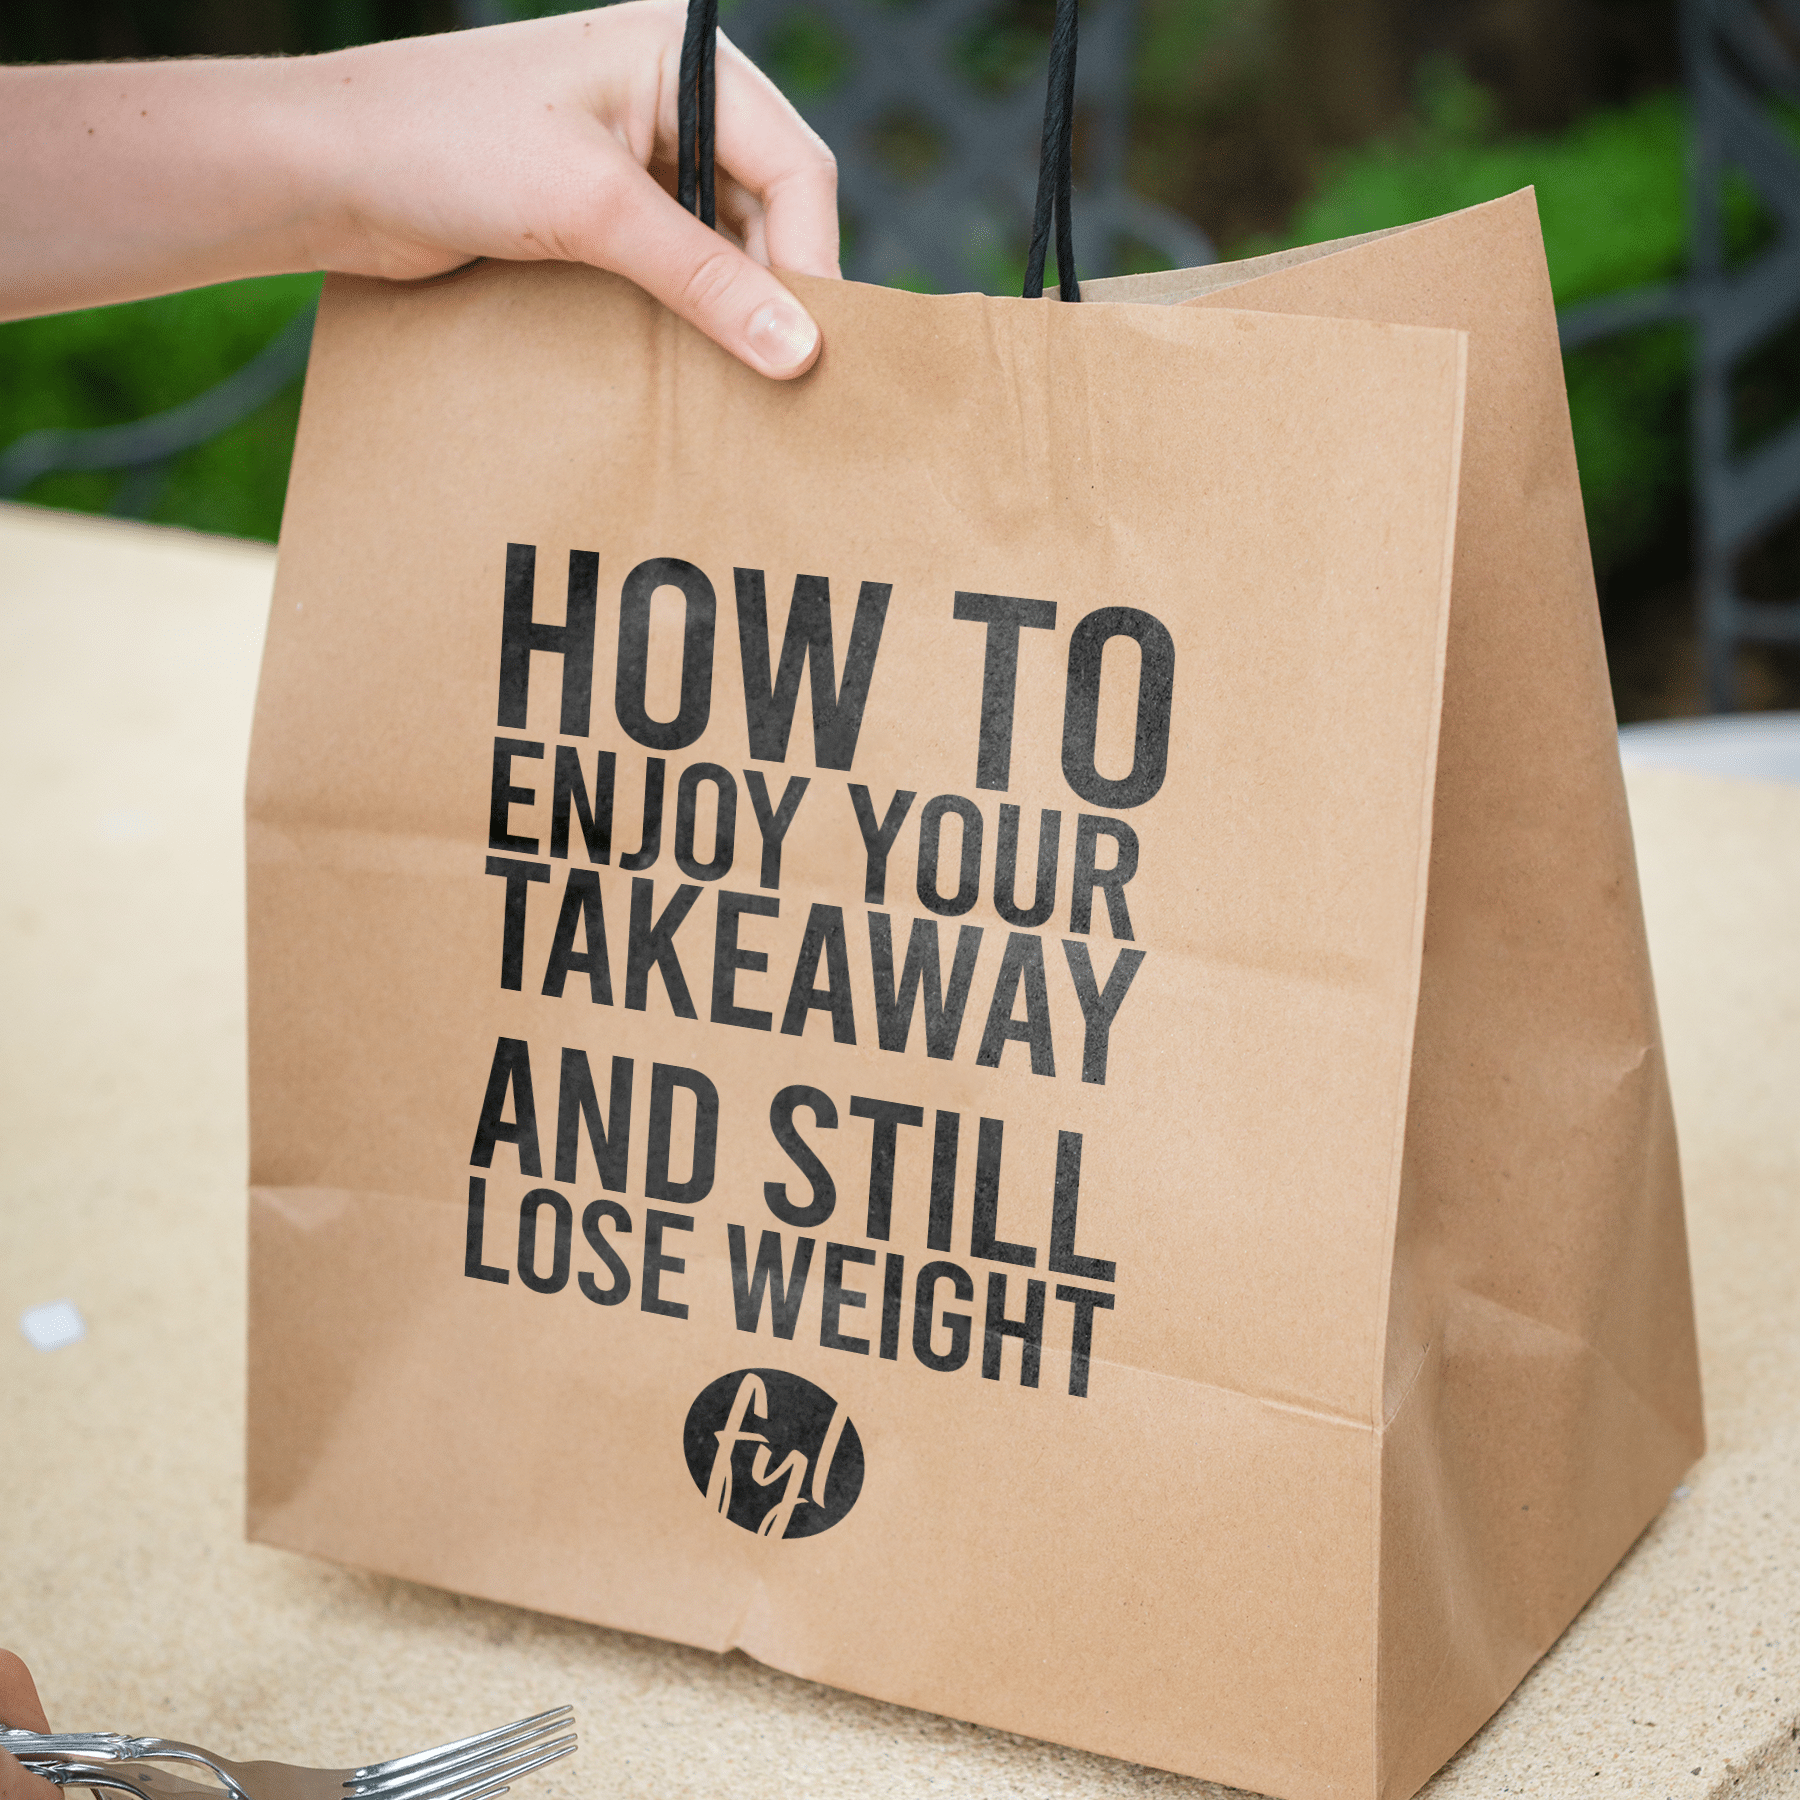 How To Enjoy Your Takeaway and Still Lose Weight